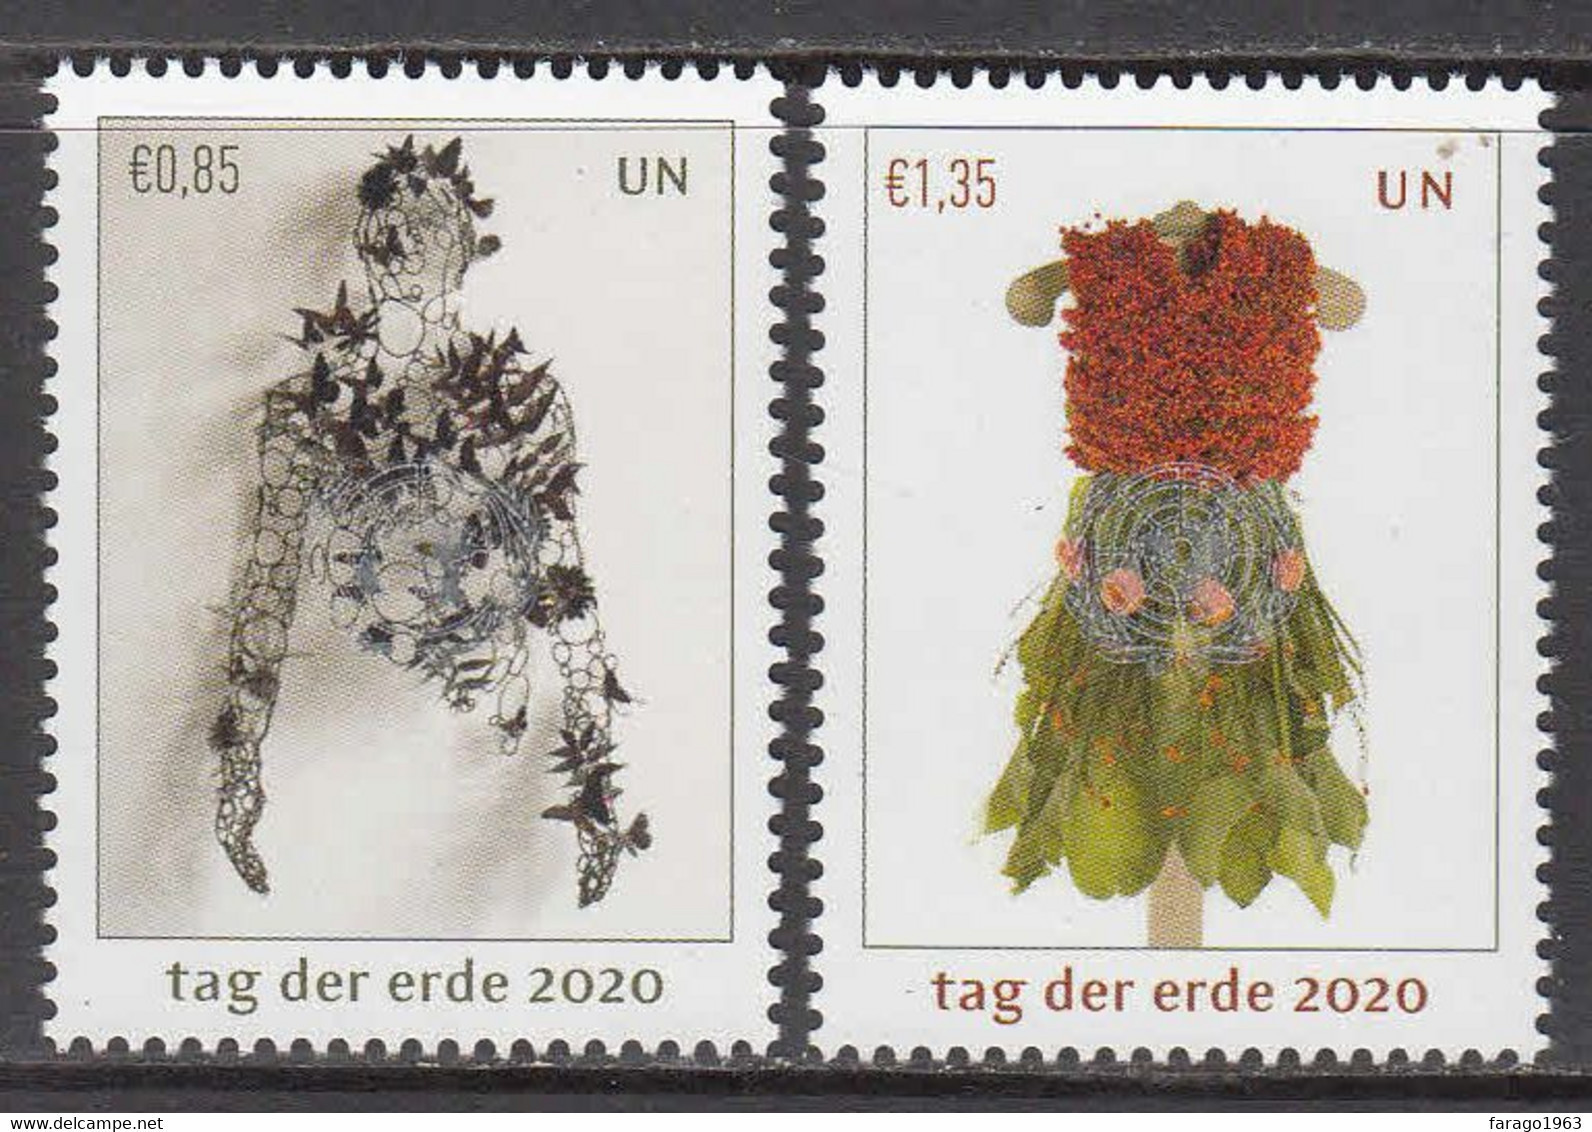 2020  United Nations Vienna Earth Day Green Environment  Complete Set Of 2 MNH  @ BELOW FACE VALUE - Nuovi